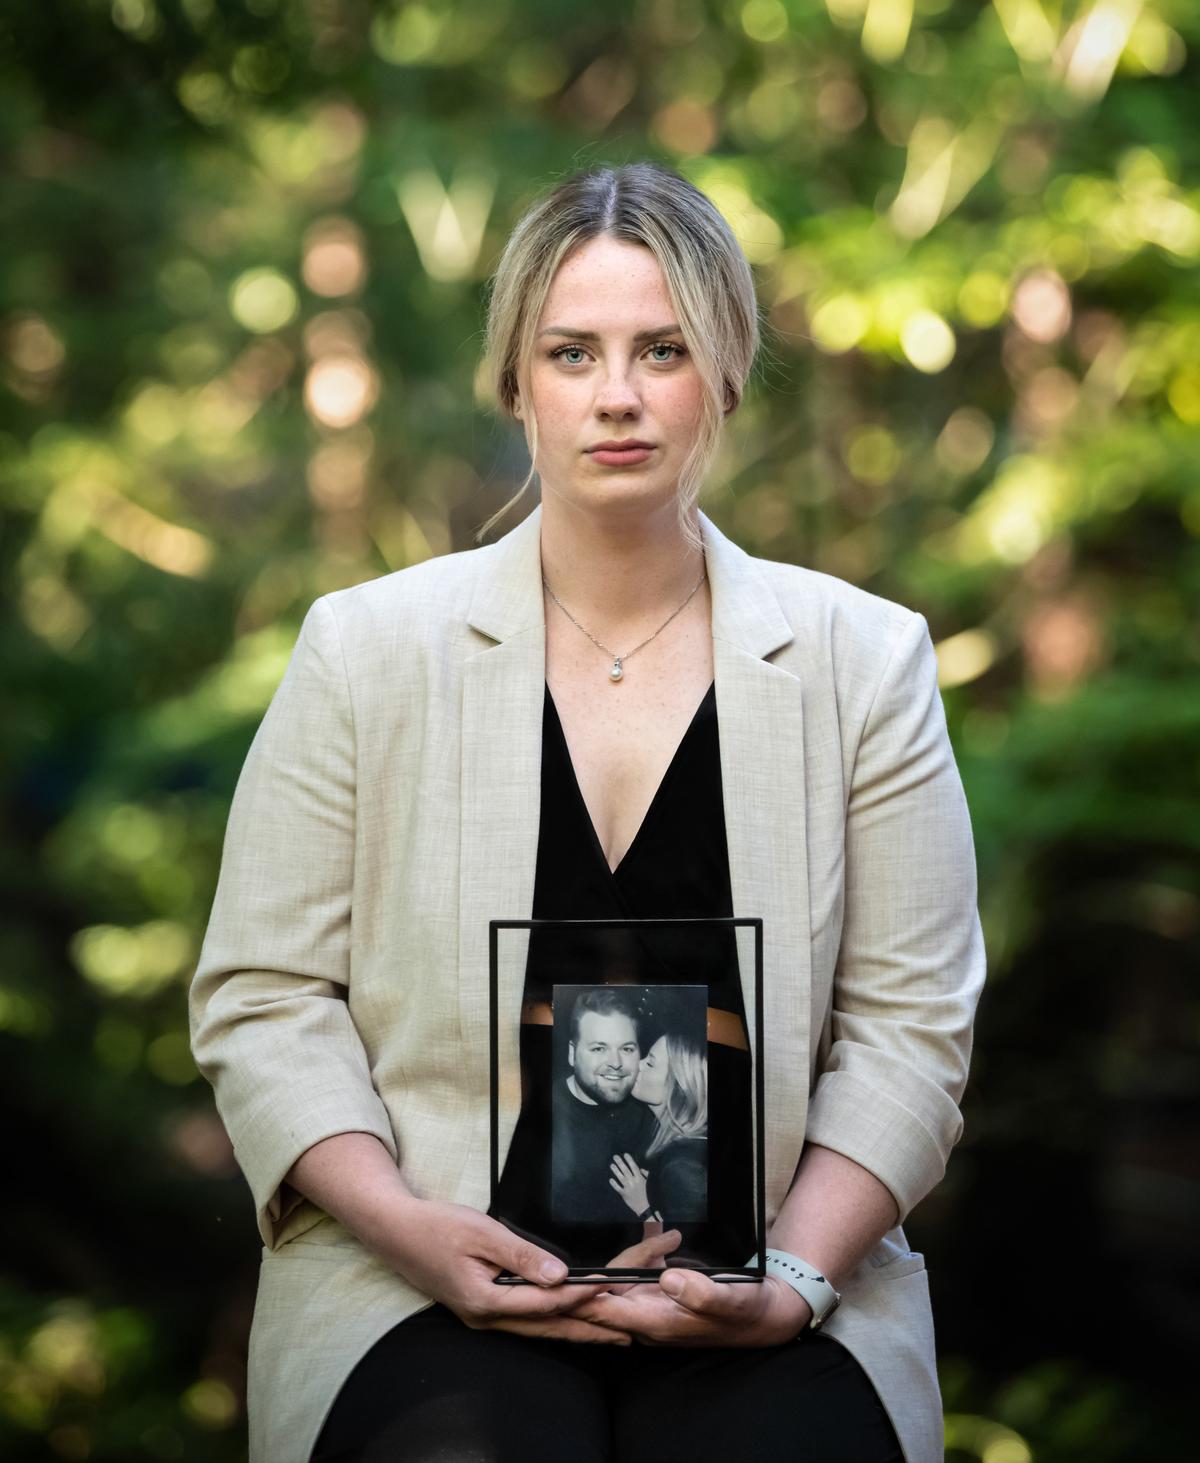 Ashley Wines, a nursing student, holds a photo of her late 32-year-old fiancé Phillip Carron on July 12, 2022. (Morgan Henry Photography for The Epoch Times)